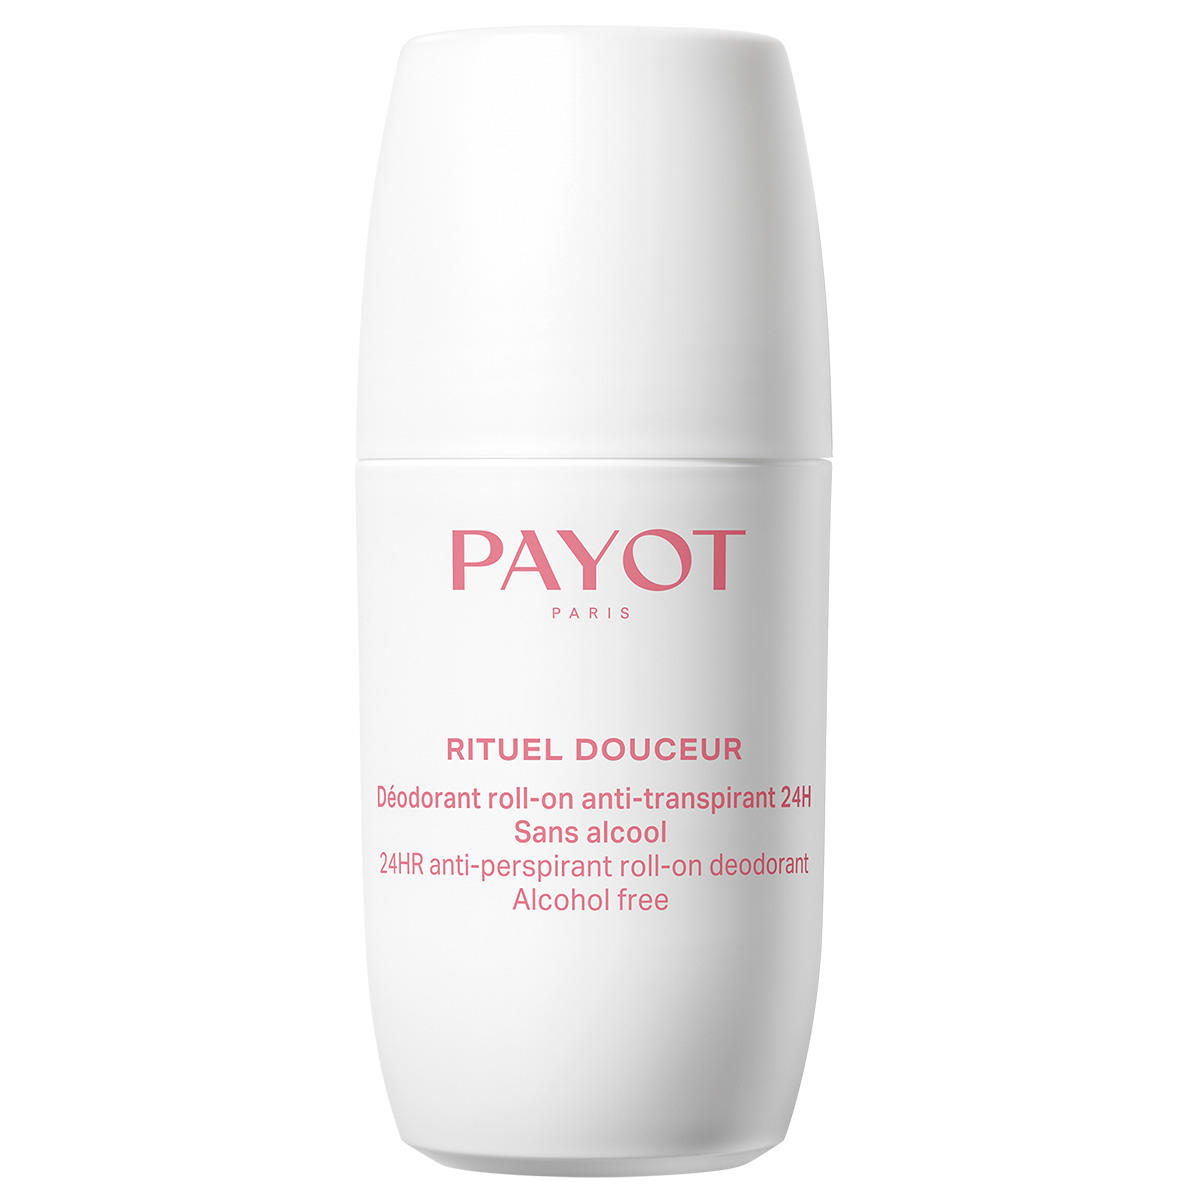 Payot RITUEL DOUCEUR Déodorant roll-on anti-transpirant 24H  75 ml - 1